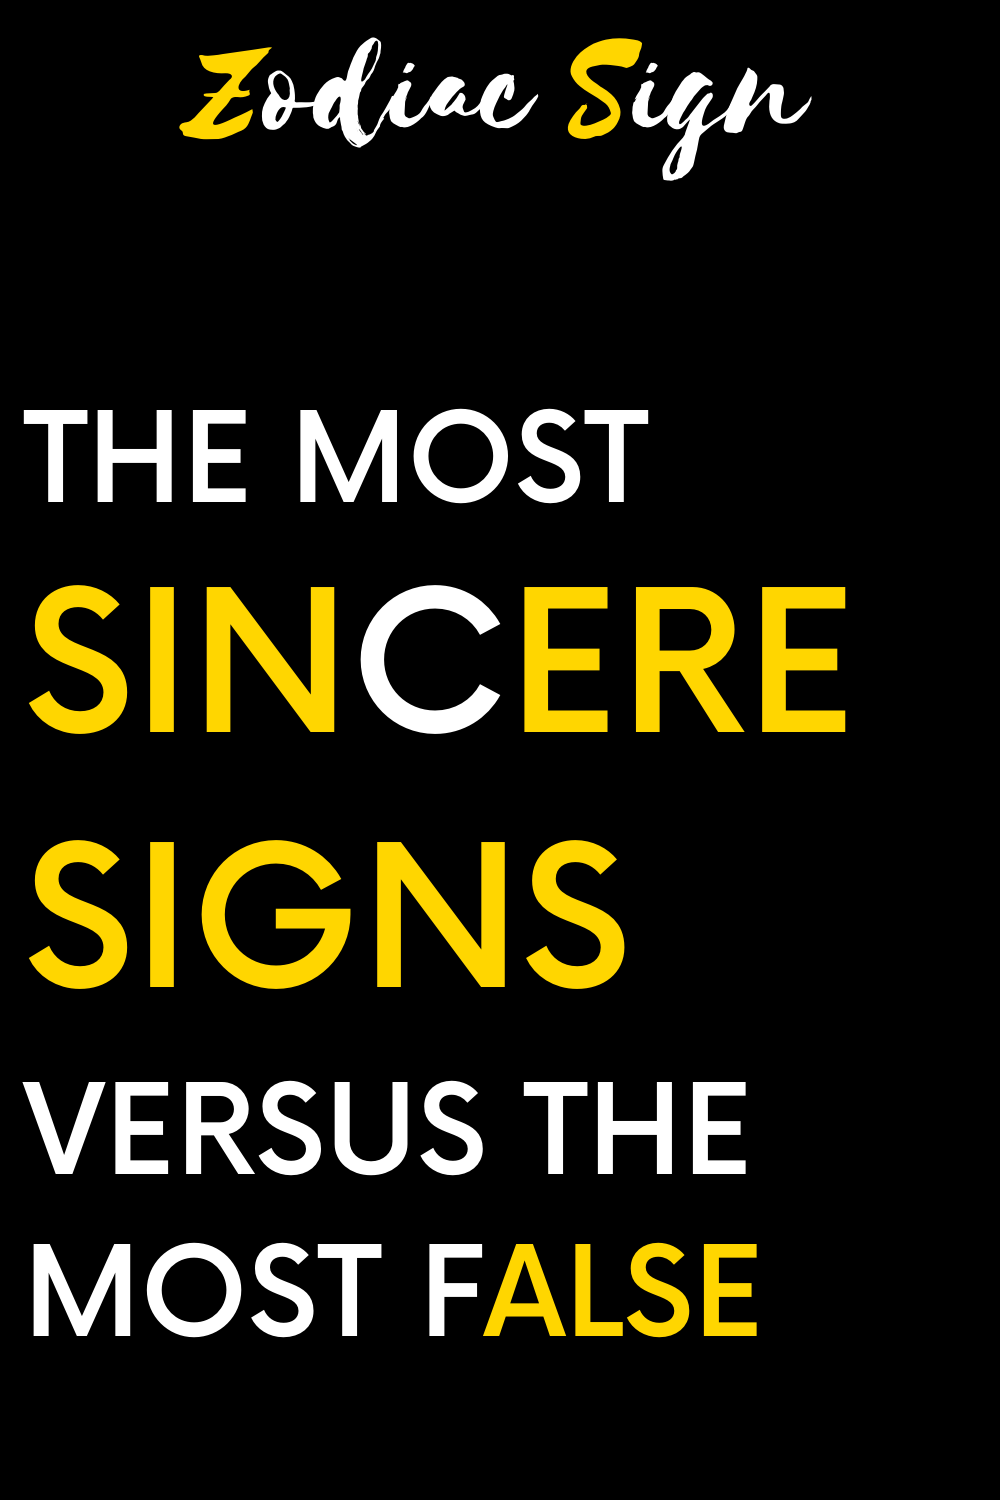 The most sincere signs versus the most false